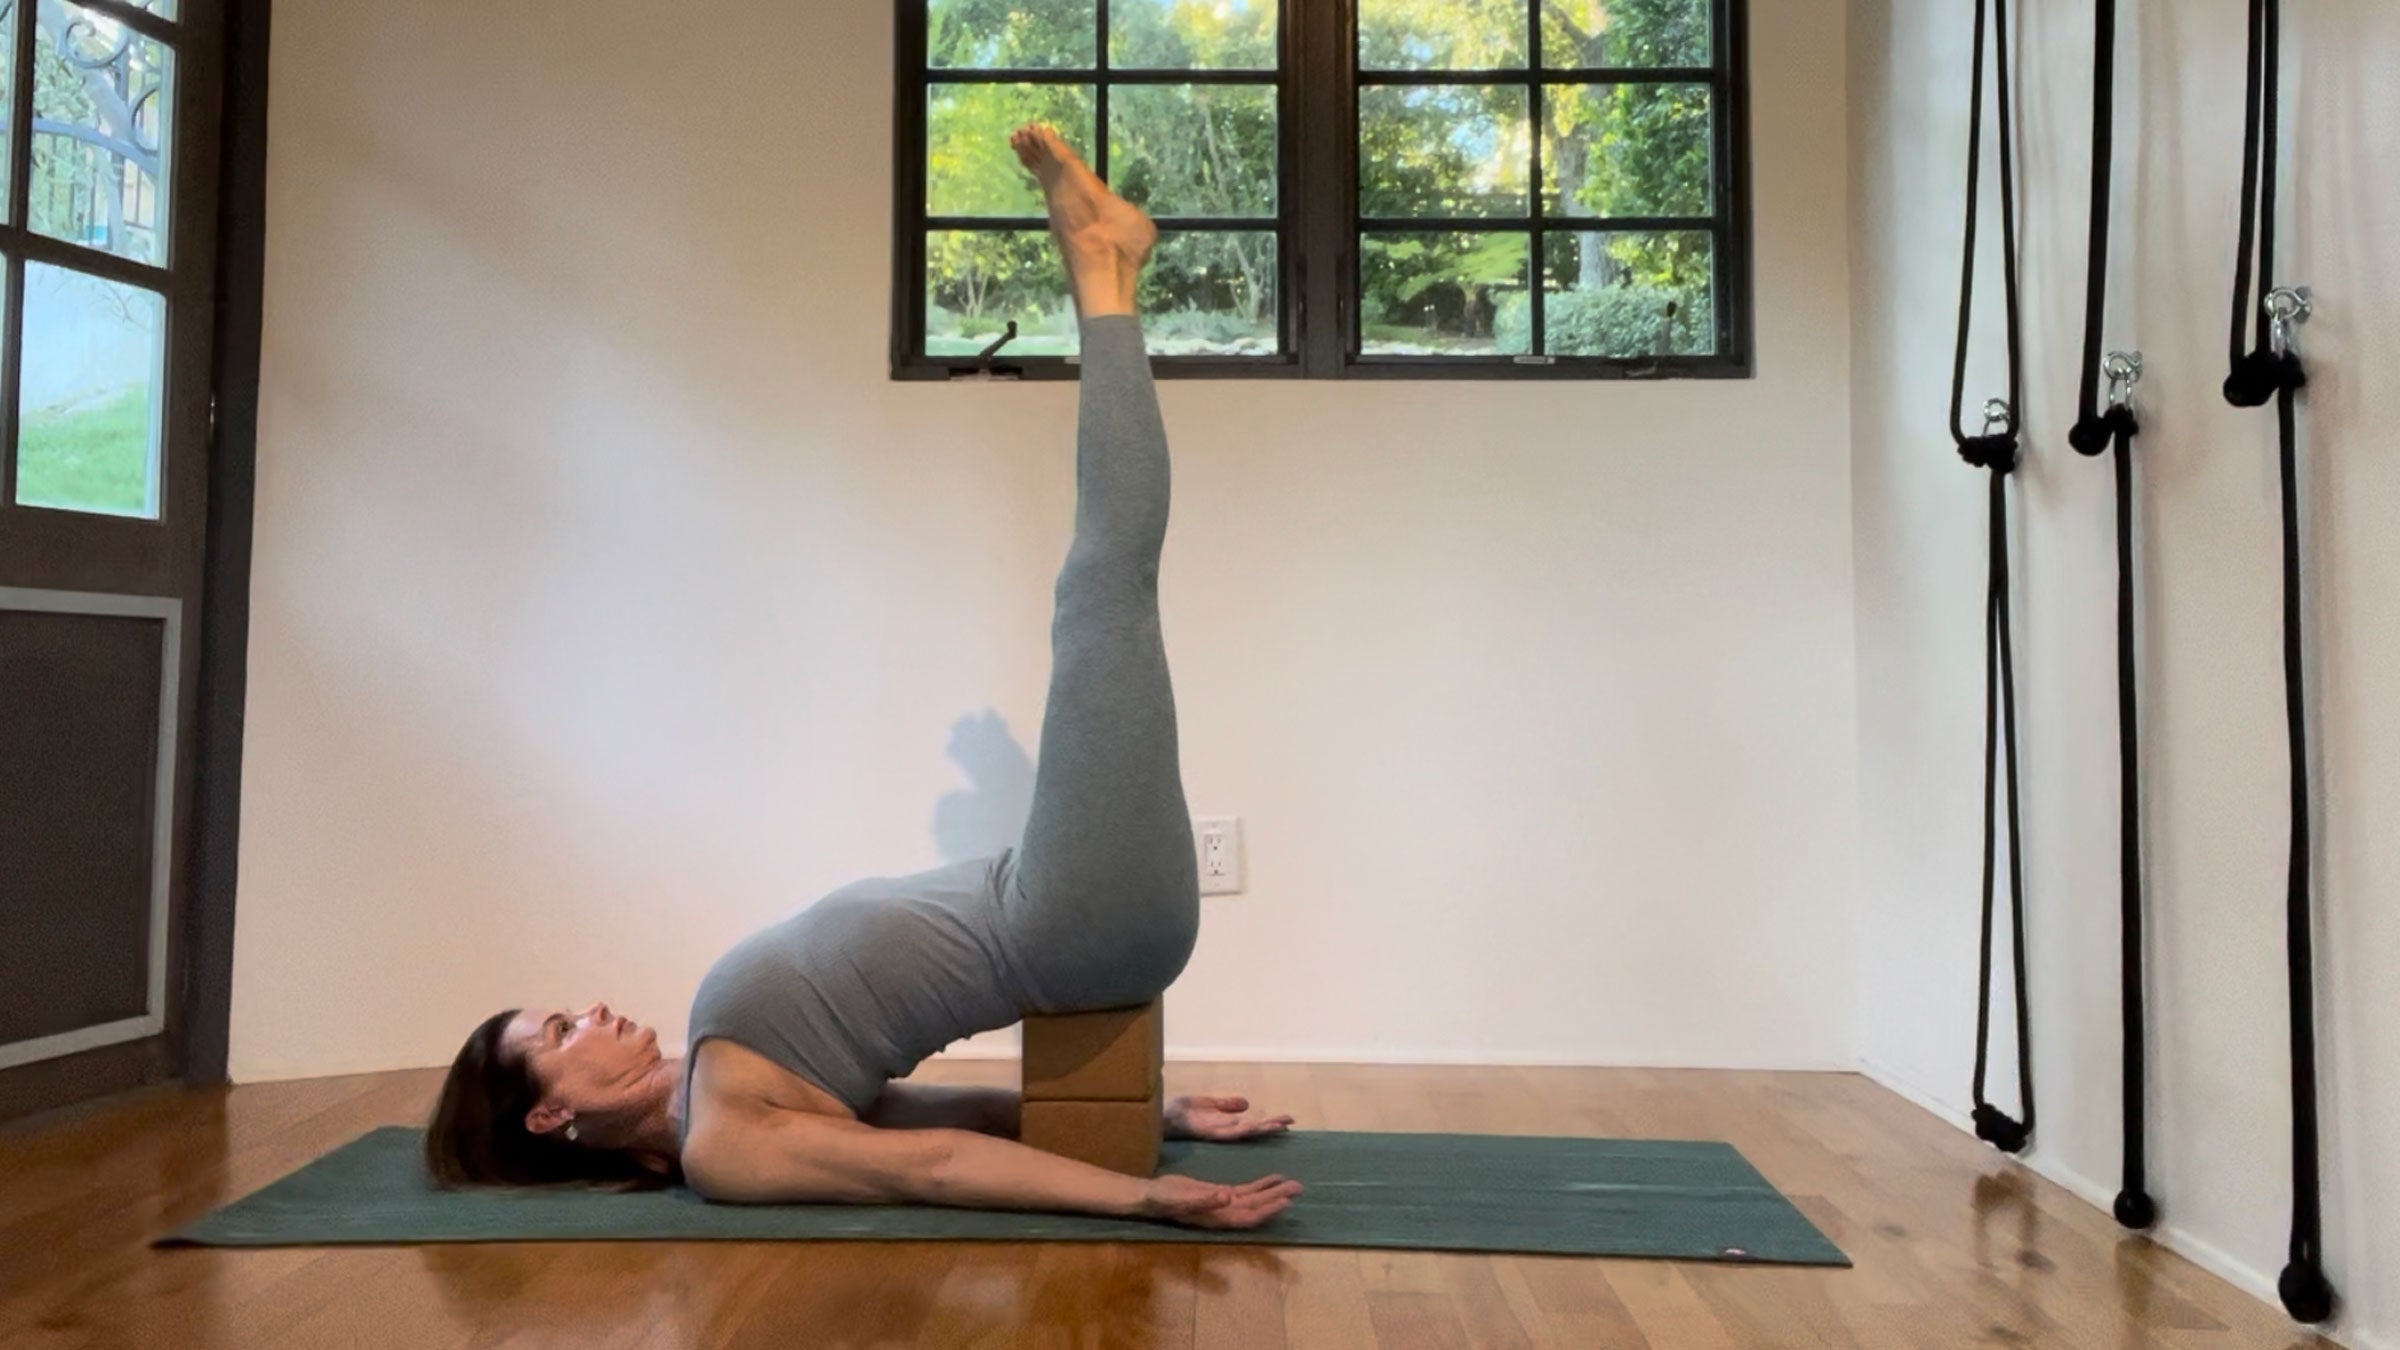 Yoga for Anxiety: 11 Poses to Try, Why It Works, and More